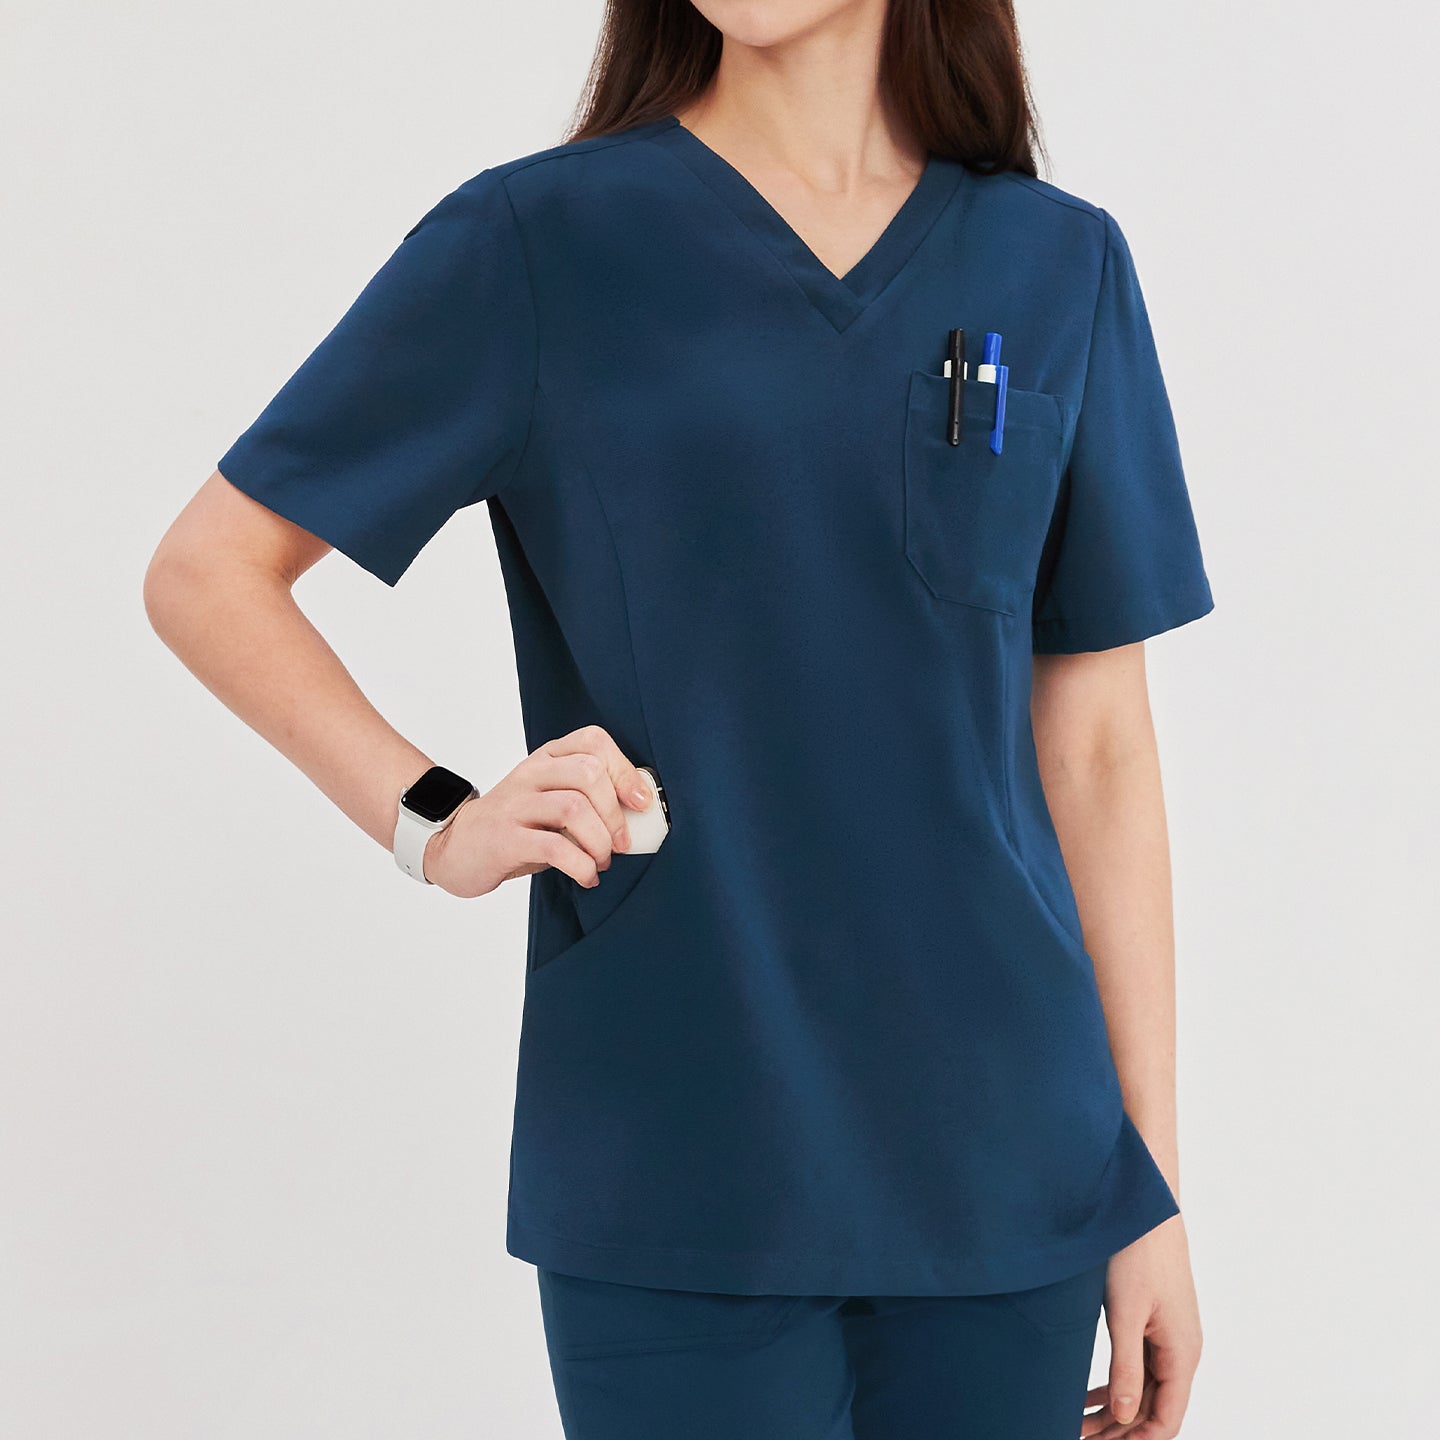 Close-up of a woman wearing a dark blue soft stretch scrub top, showing the chest pocket with pens and side pocket details, with a smartwatch on her wrist,Dark Blue